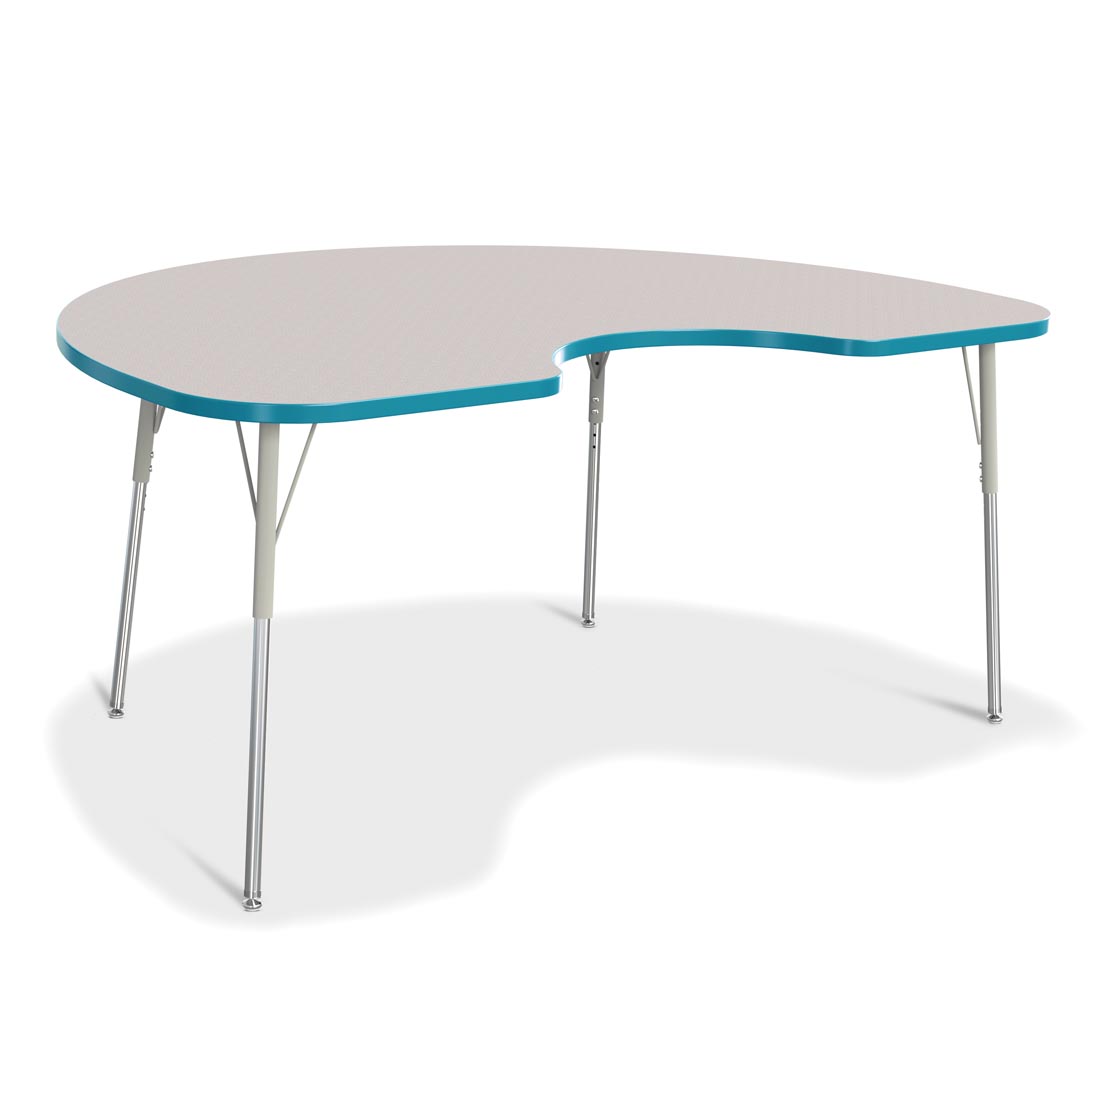 Berries Kidney Activity Table Adult Height Gray With Teal Edge